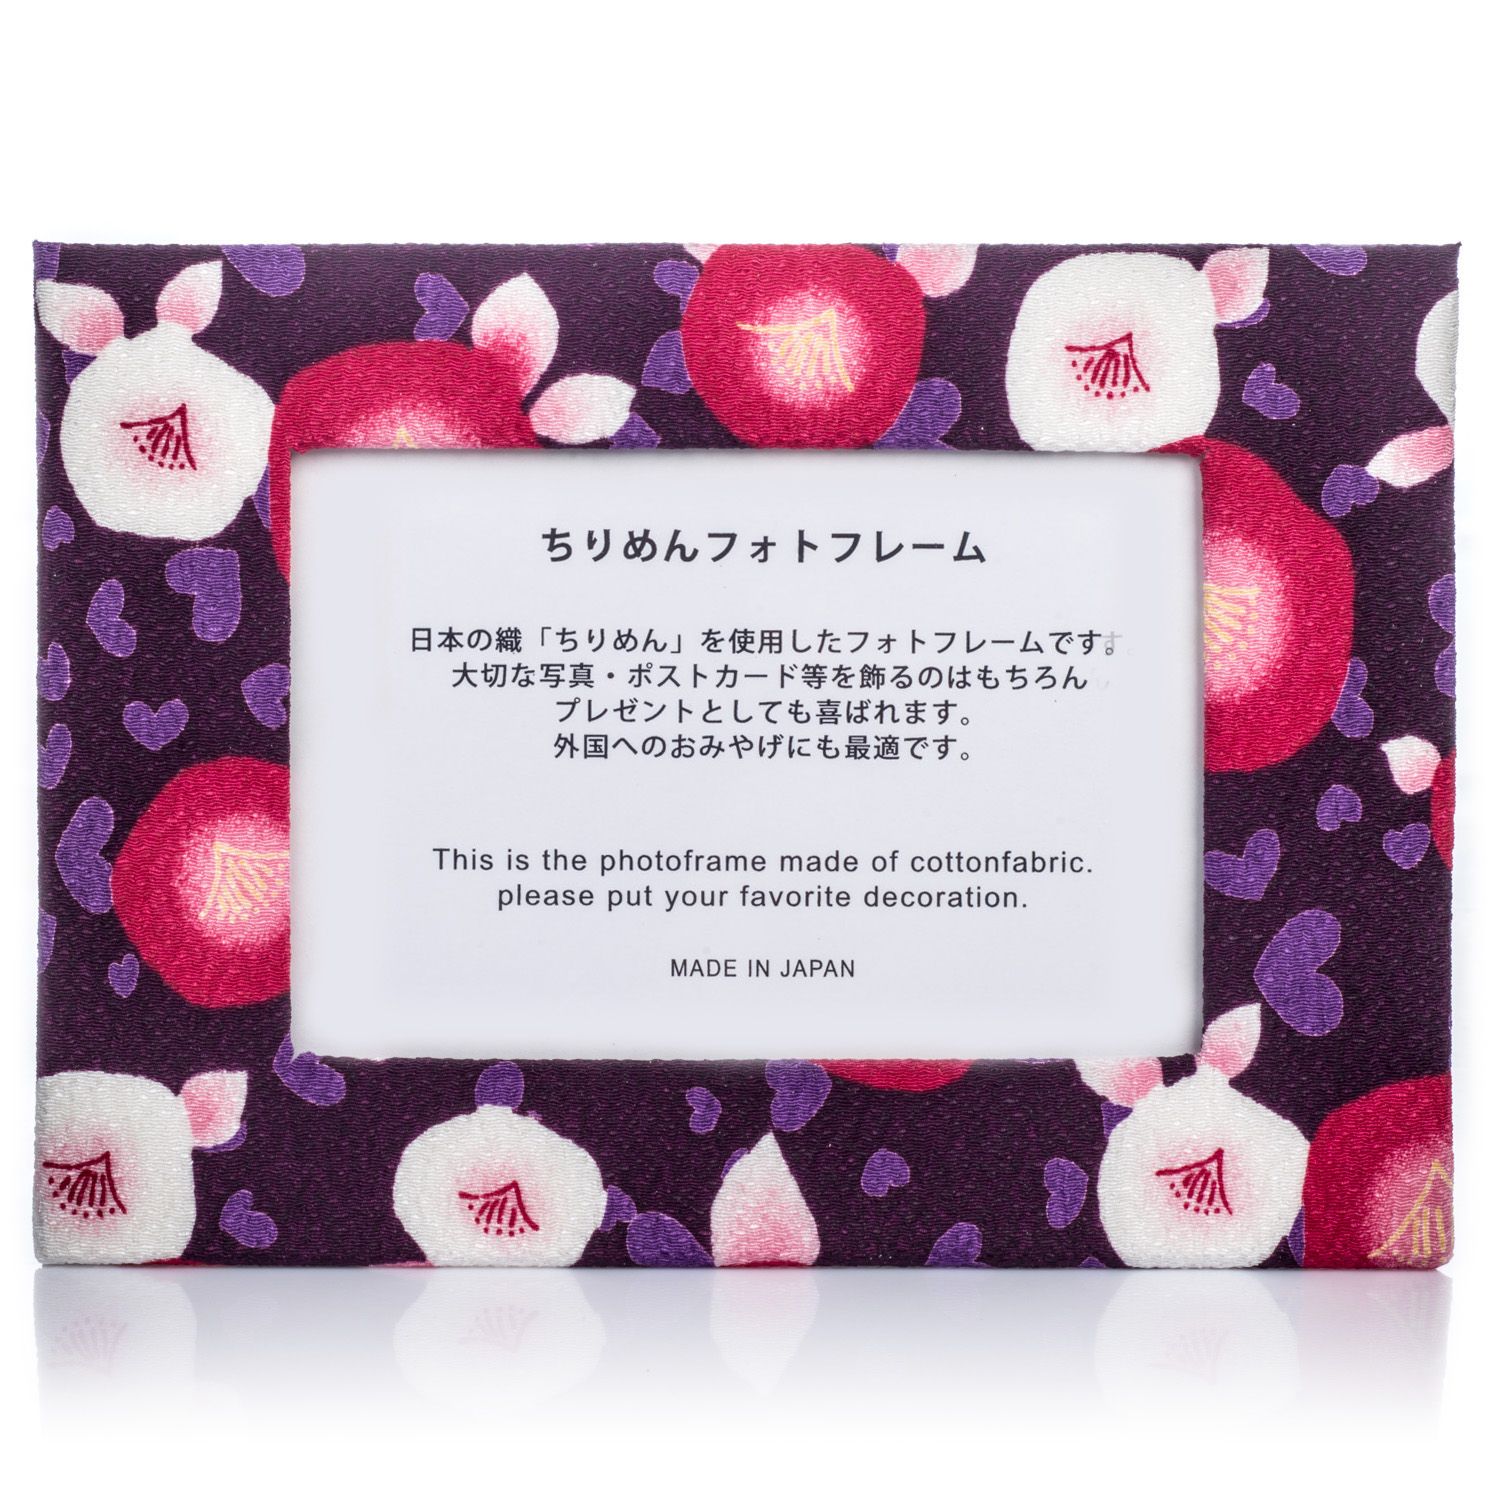 Purple Floral Japanese Photo Frame Pertaining To Purple Floral Credenzas (View 22 of 30)